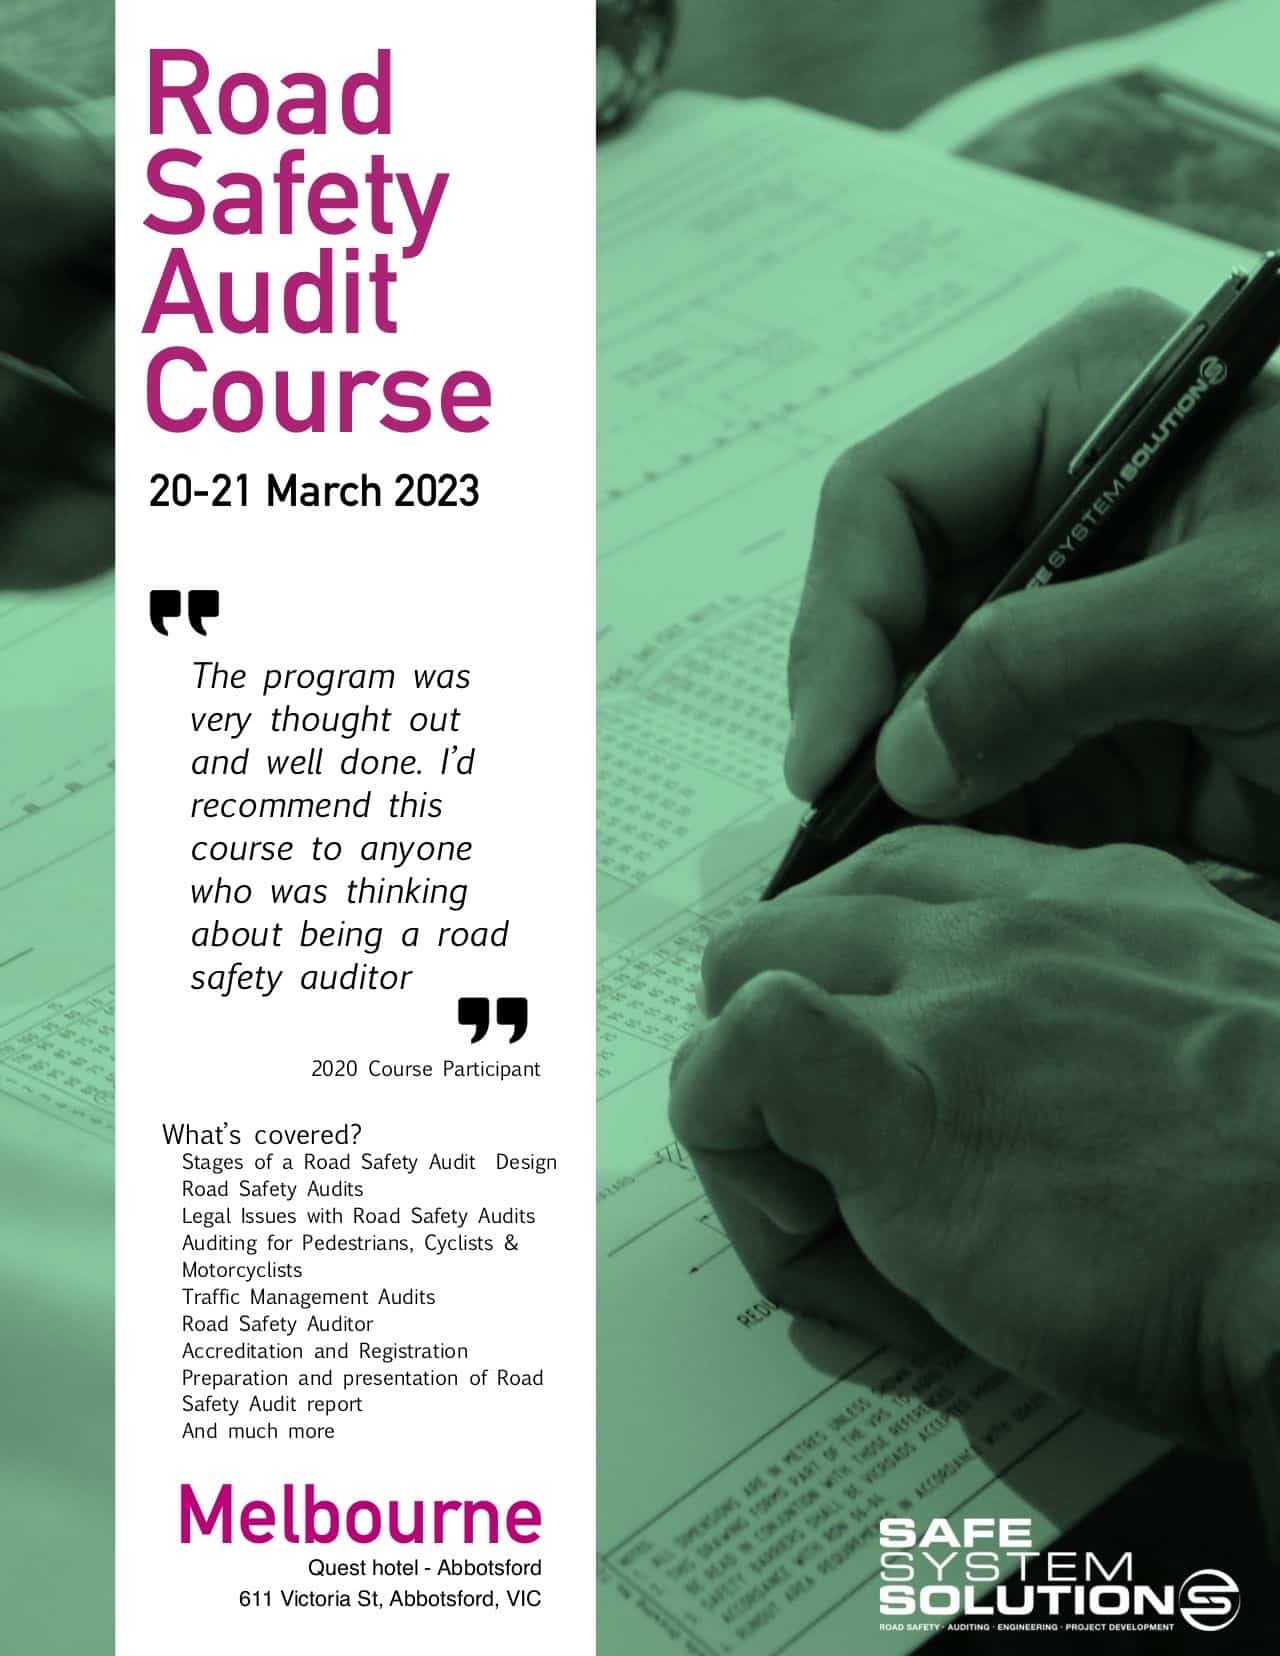 Our Road Safety Audit Course in Melbourne, March 2023